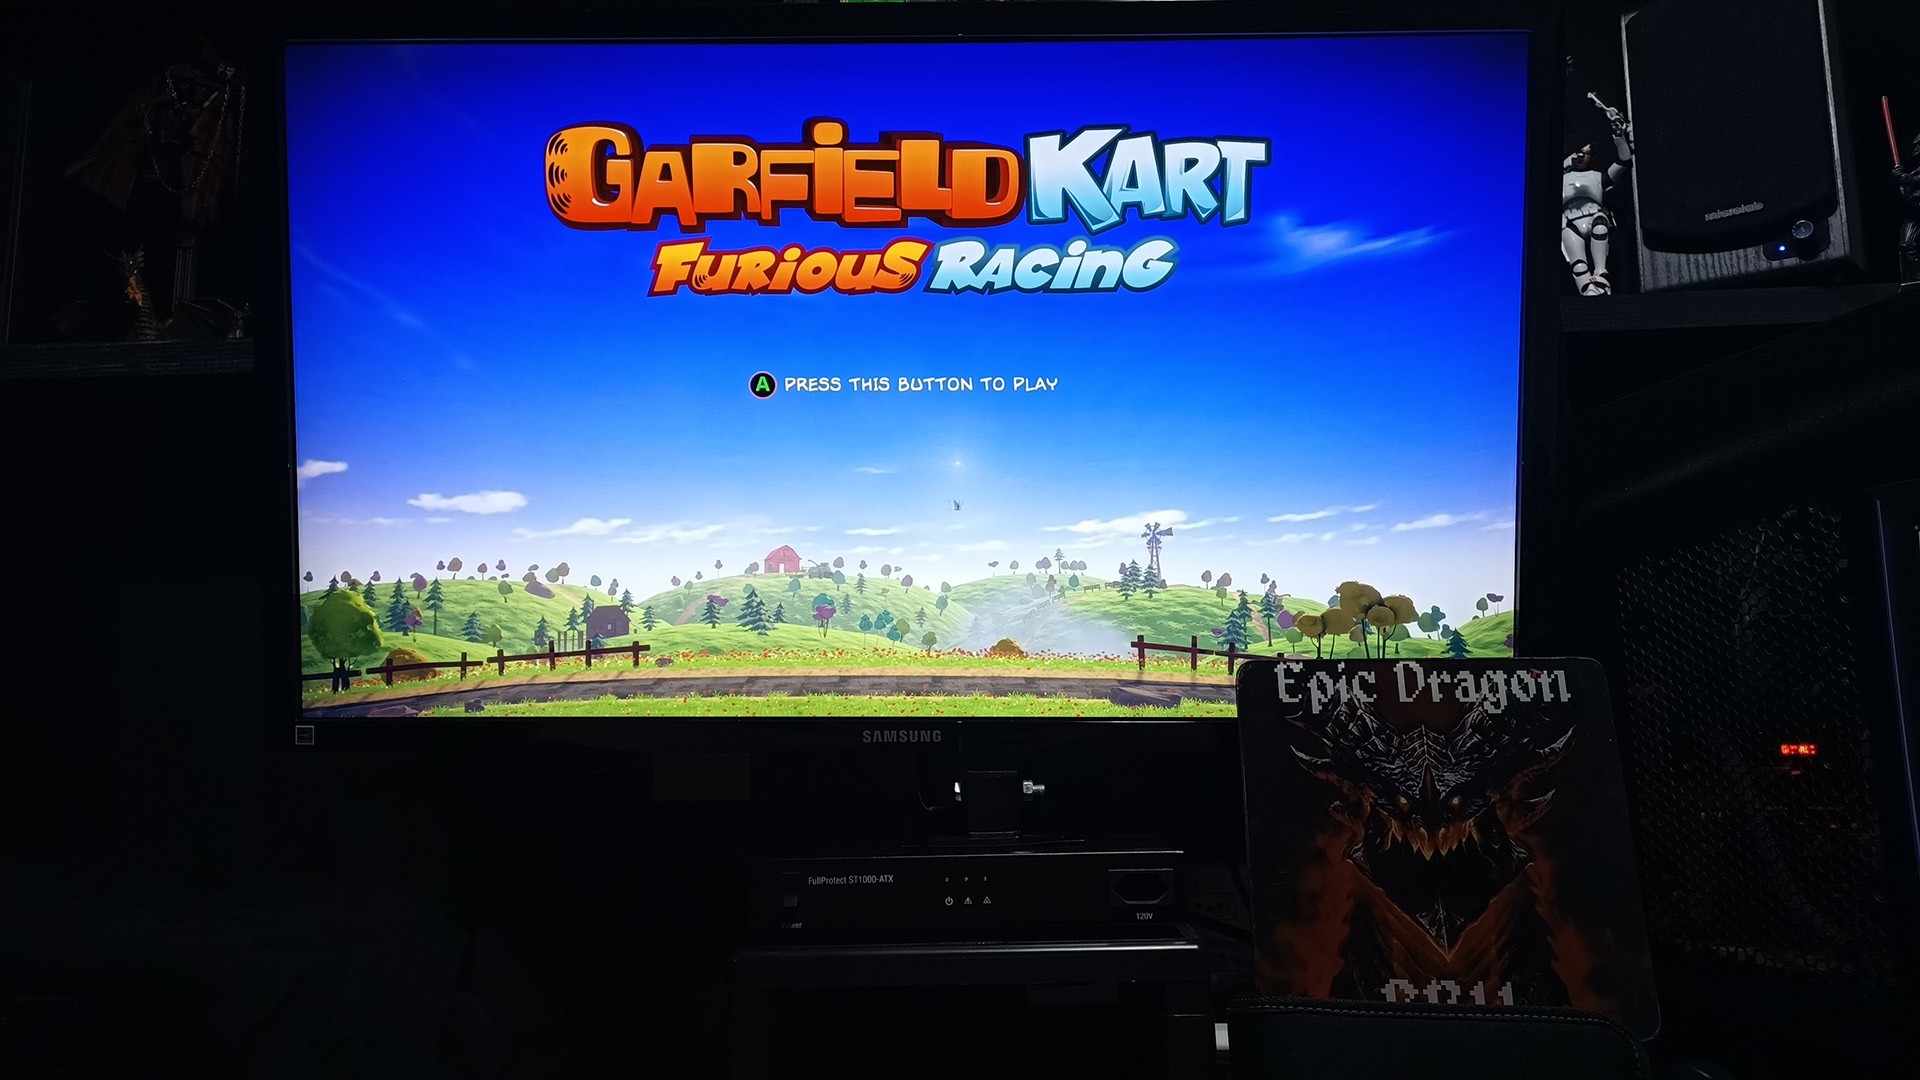 Garfield Kart Furious Racing: Catz In The Hood [Time Trial: Lap Time] time of 0:00:25.55